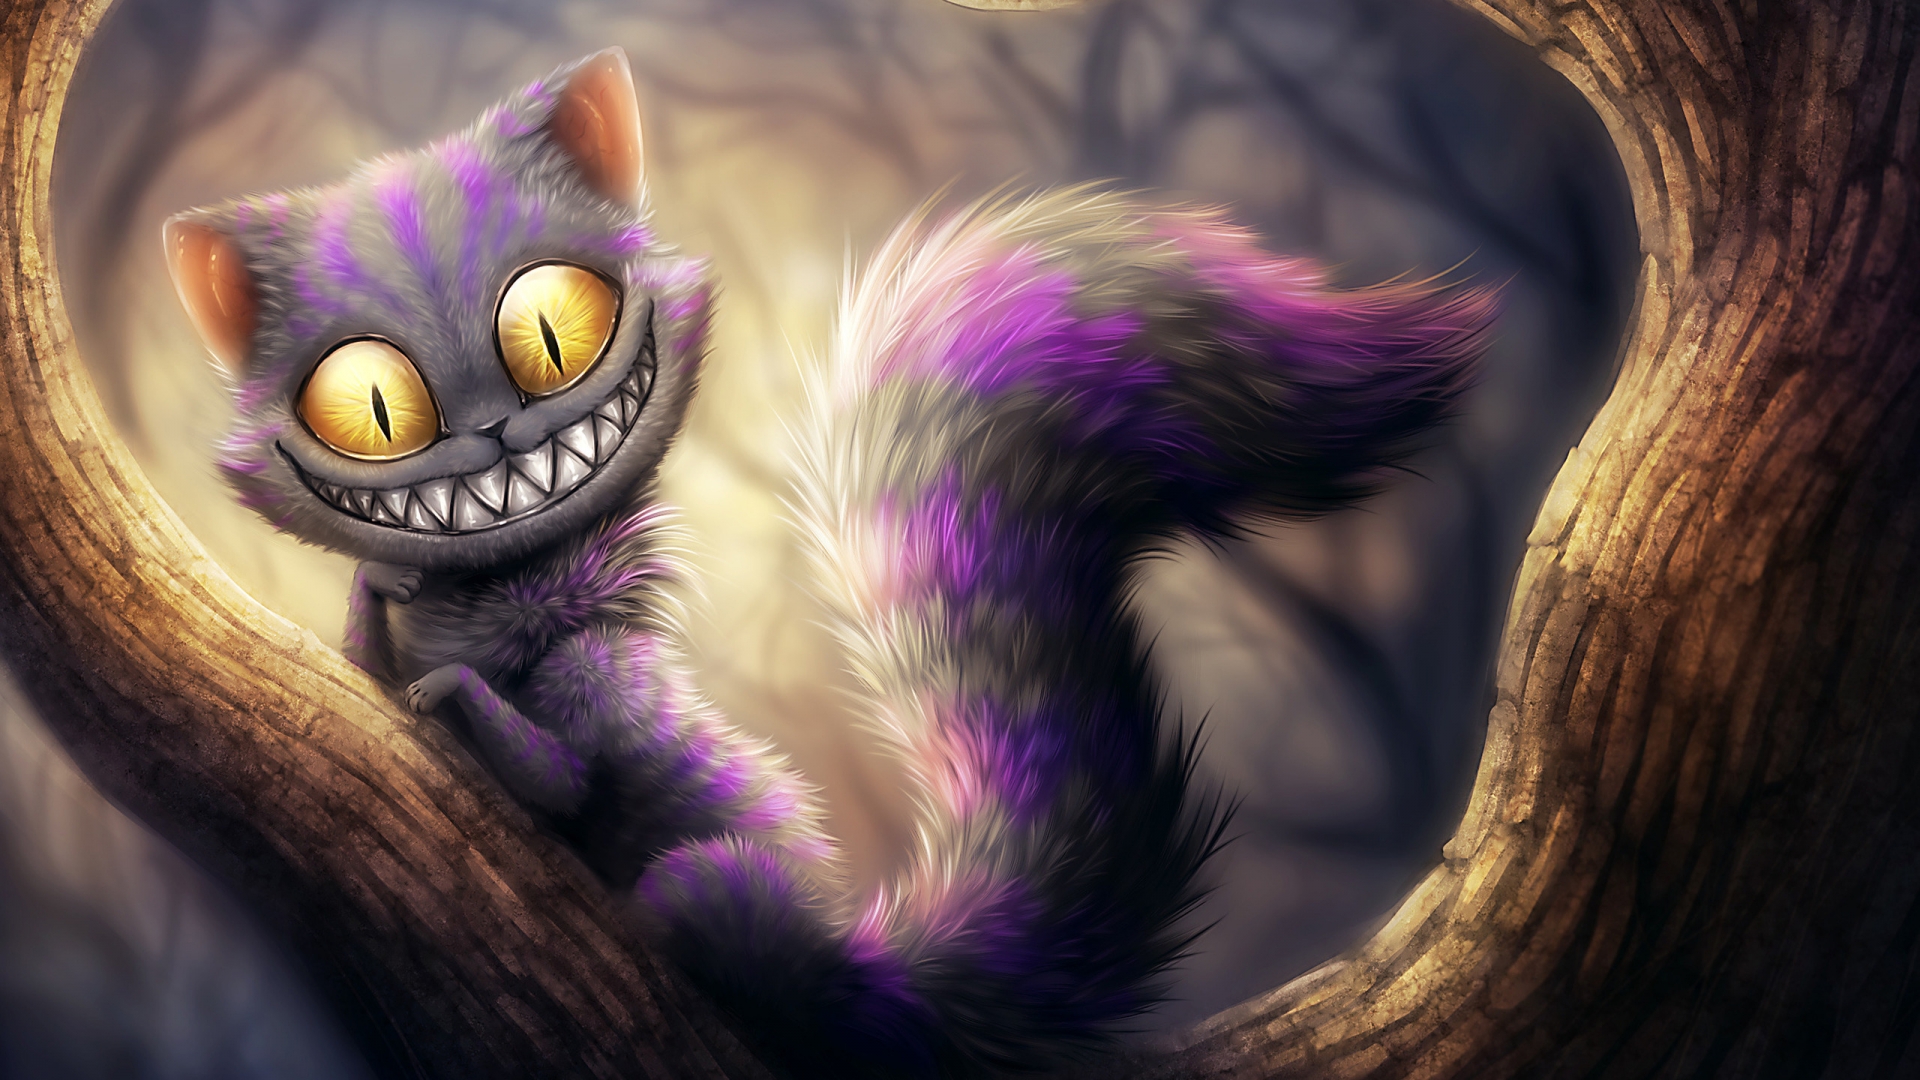 Cheshire Cat from Alice Adventures in Wonderland for 1920 x 1080 HDTV 1080p resolution